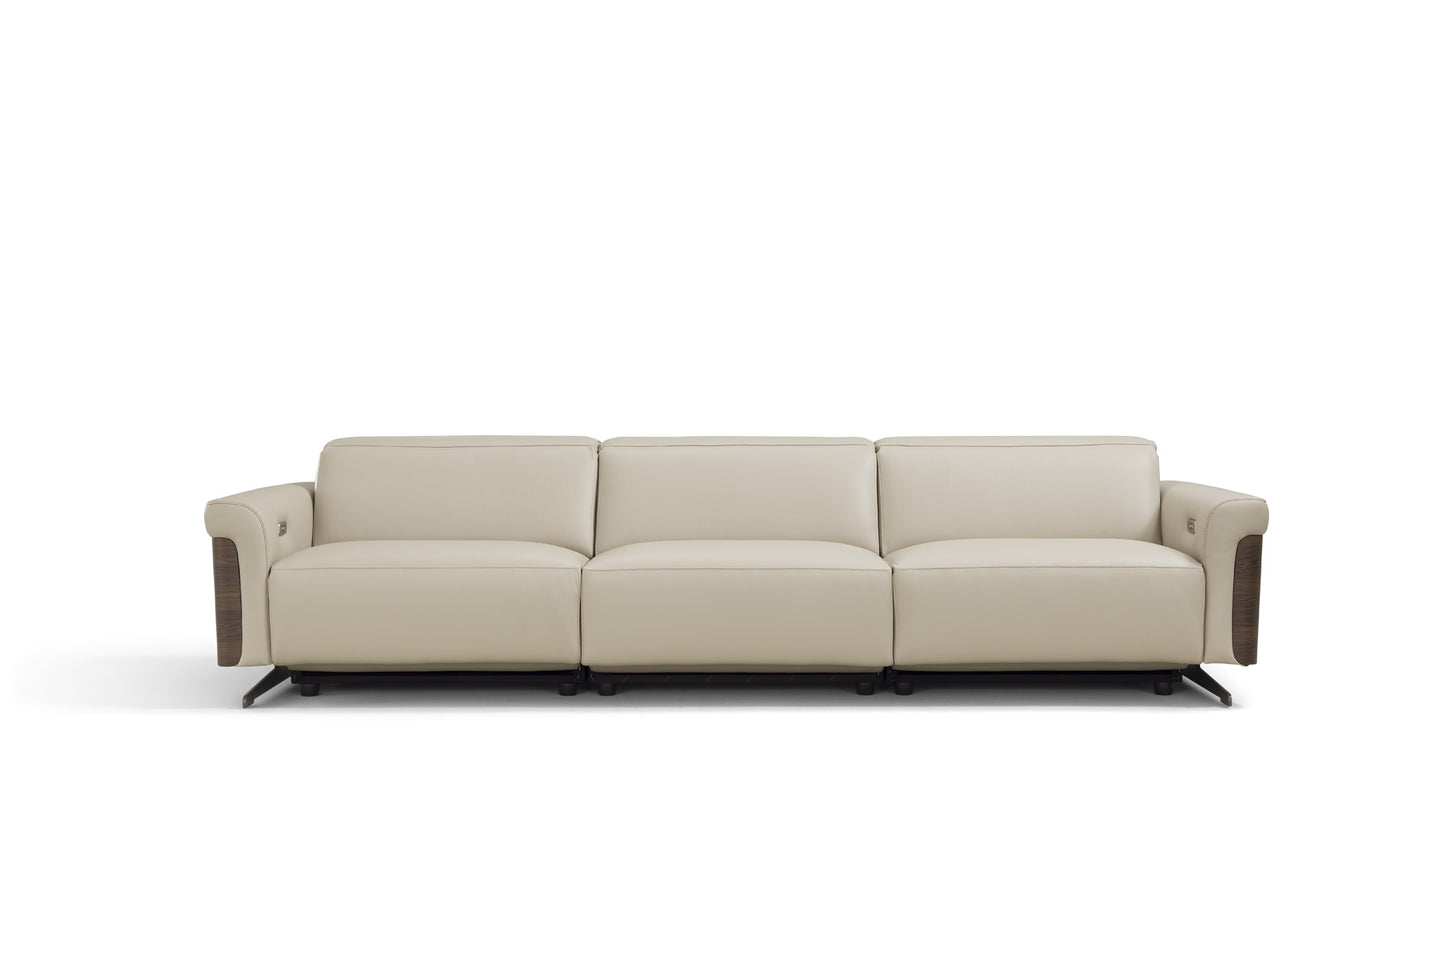 INCANTO - I803 EXTRA LARGE Sofa 119"L with Walnut Arm Accents with/3 power Recliners